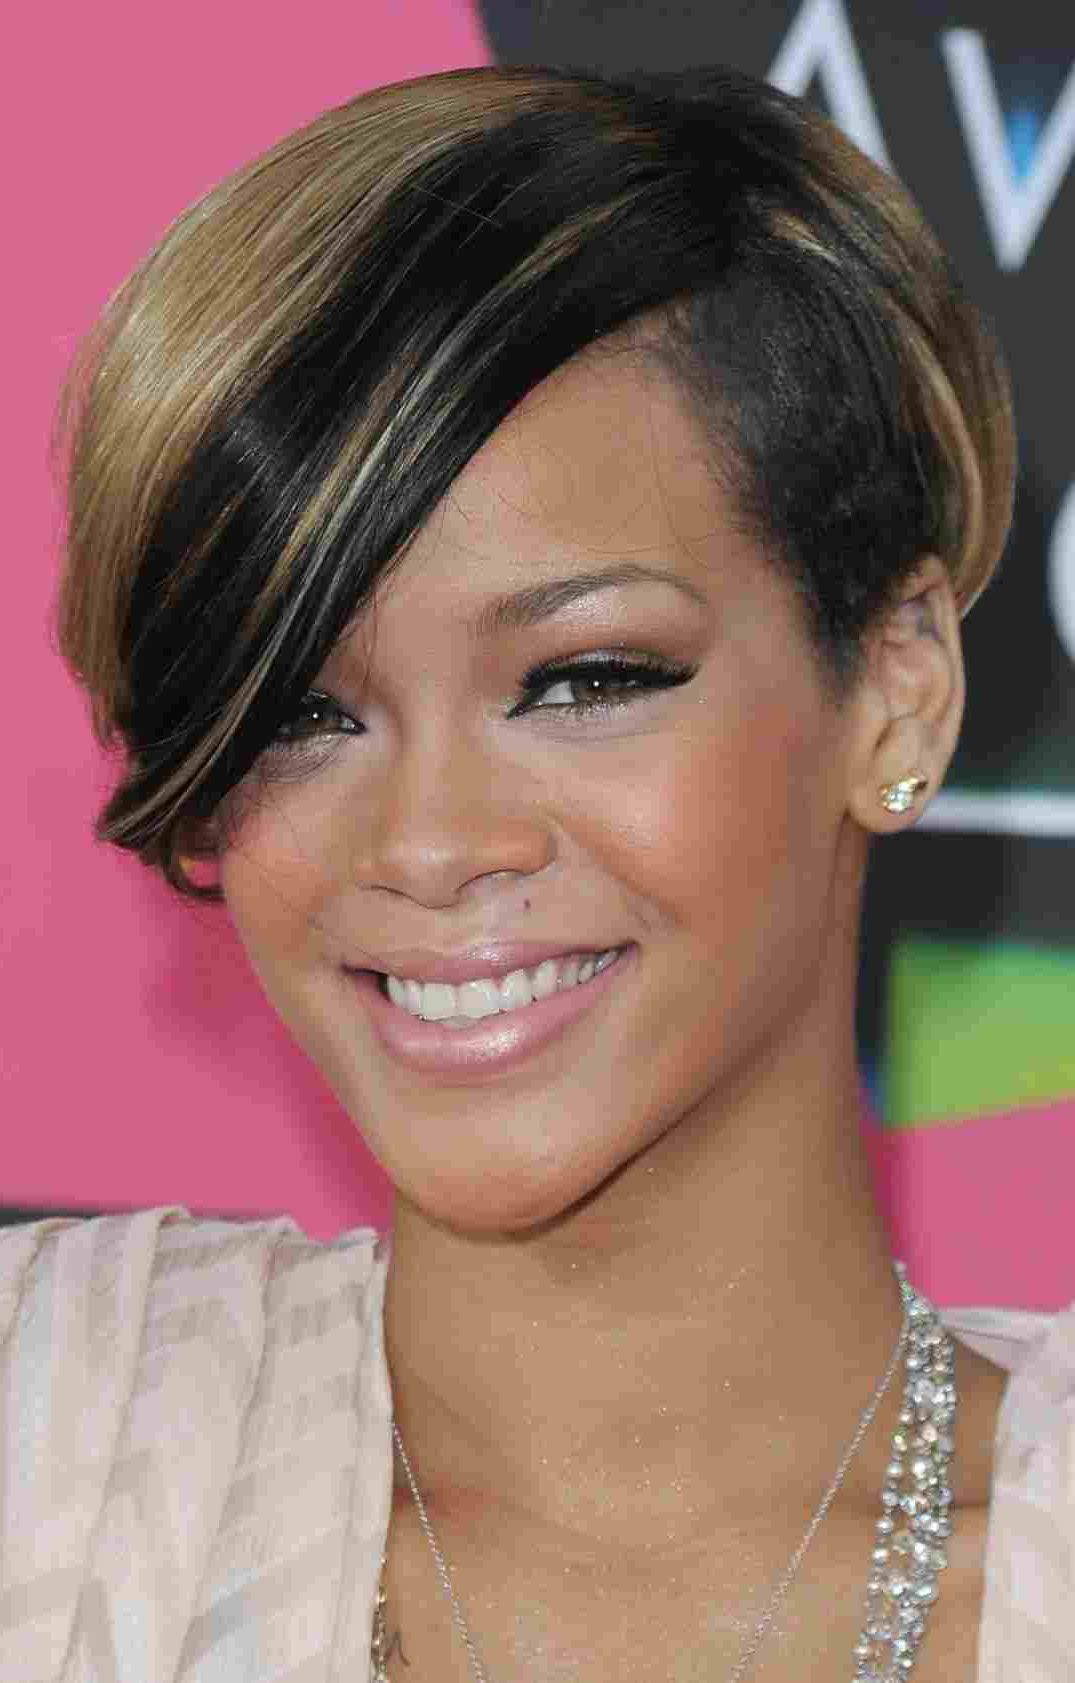 Short Haircuts For Oval Faces Women With Hairstyles Pertaining To Cute Short Hairstyles For Thin Hair (View 18 of 25)